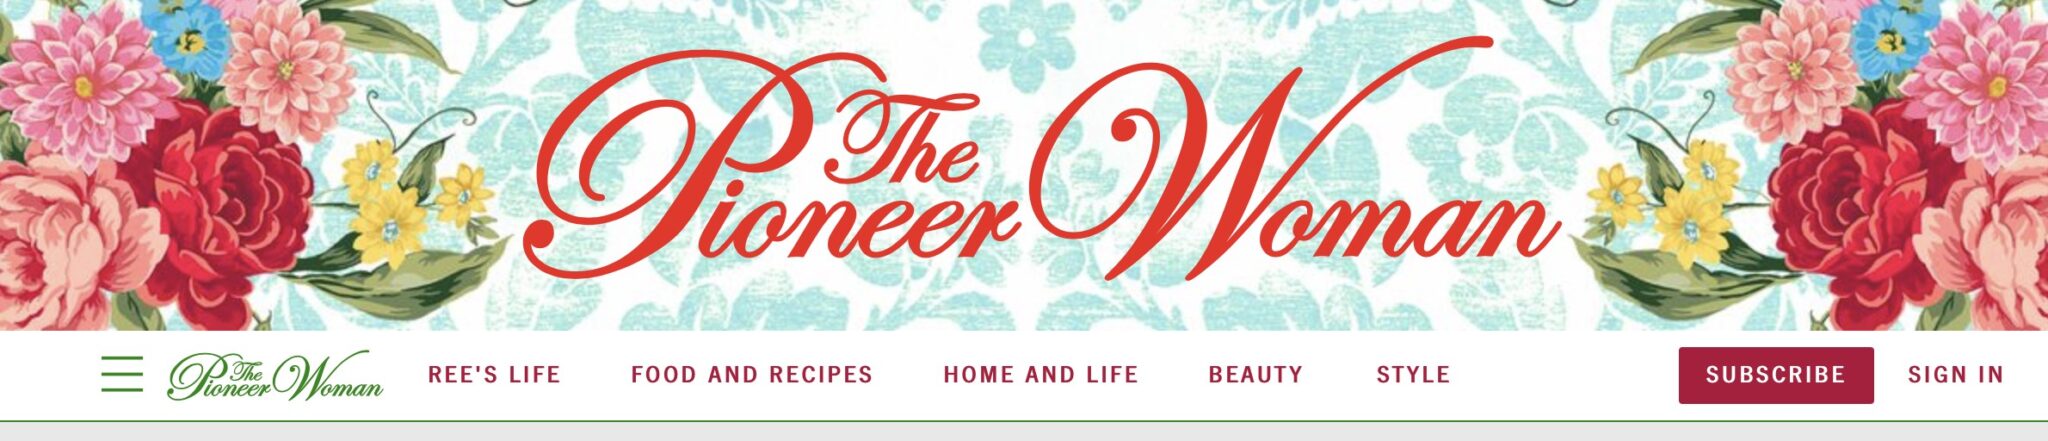 the pioneer woman lifestyle blog